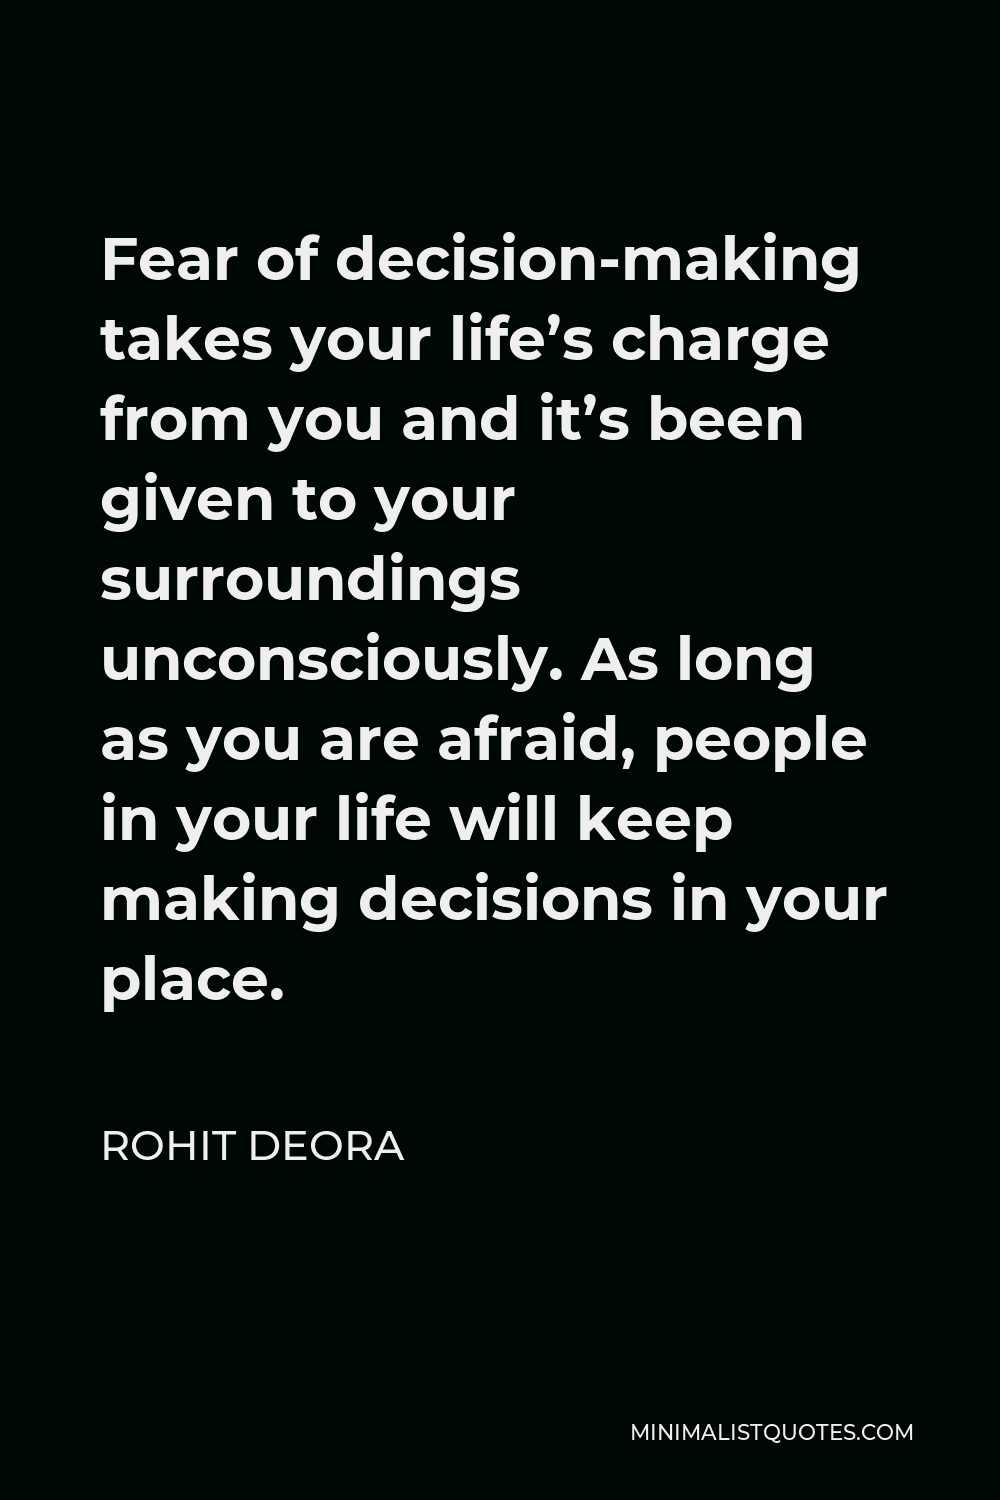 Rohit Deora Quote - Fear of decision-making takes your life’s charge from you and it’s been given to your surroundings unconsciously. As long as you are afraid, people in your life will keep making decisions in your place.